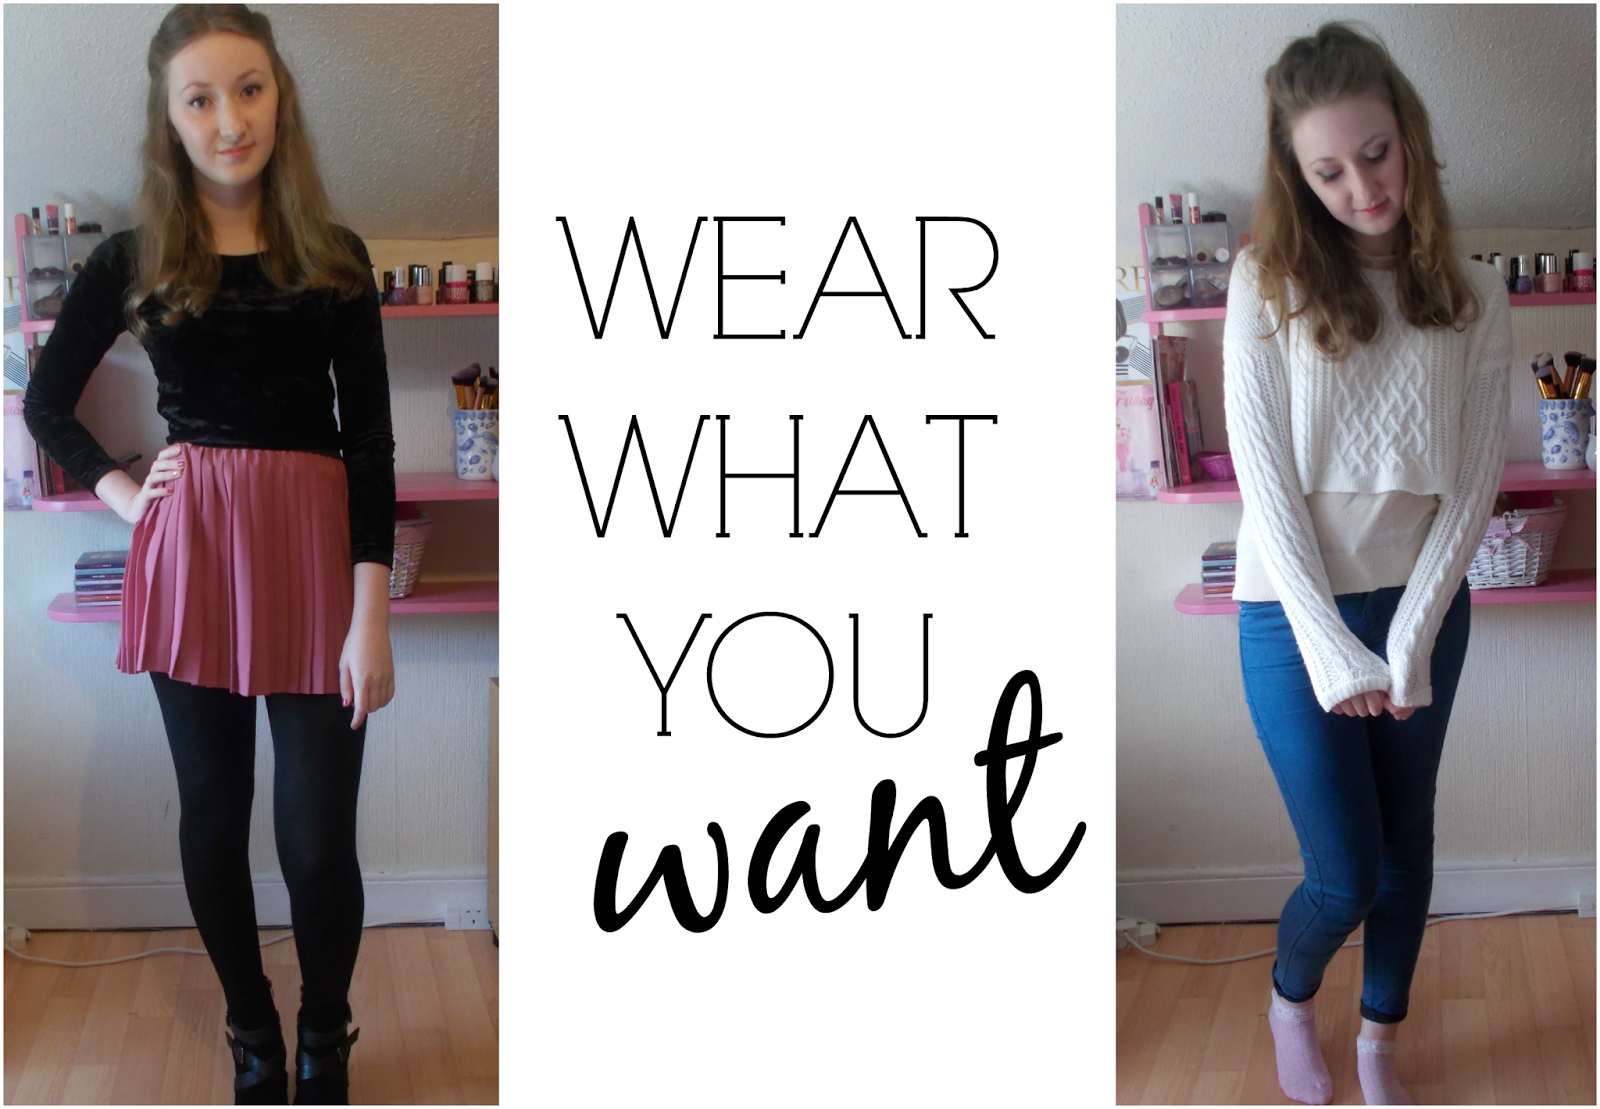 wear what you want fashion inspiration freedom positivity #droptheplus trends comfort zone